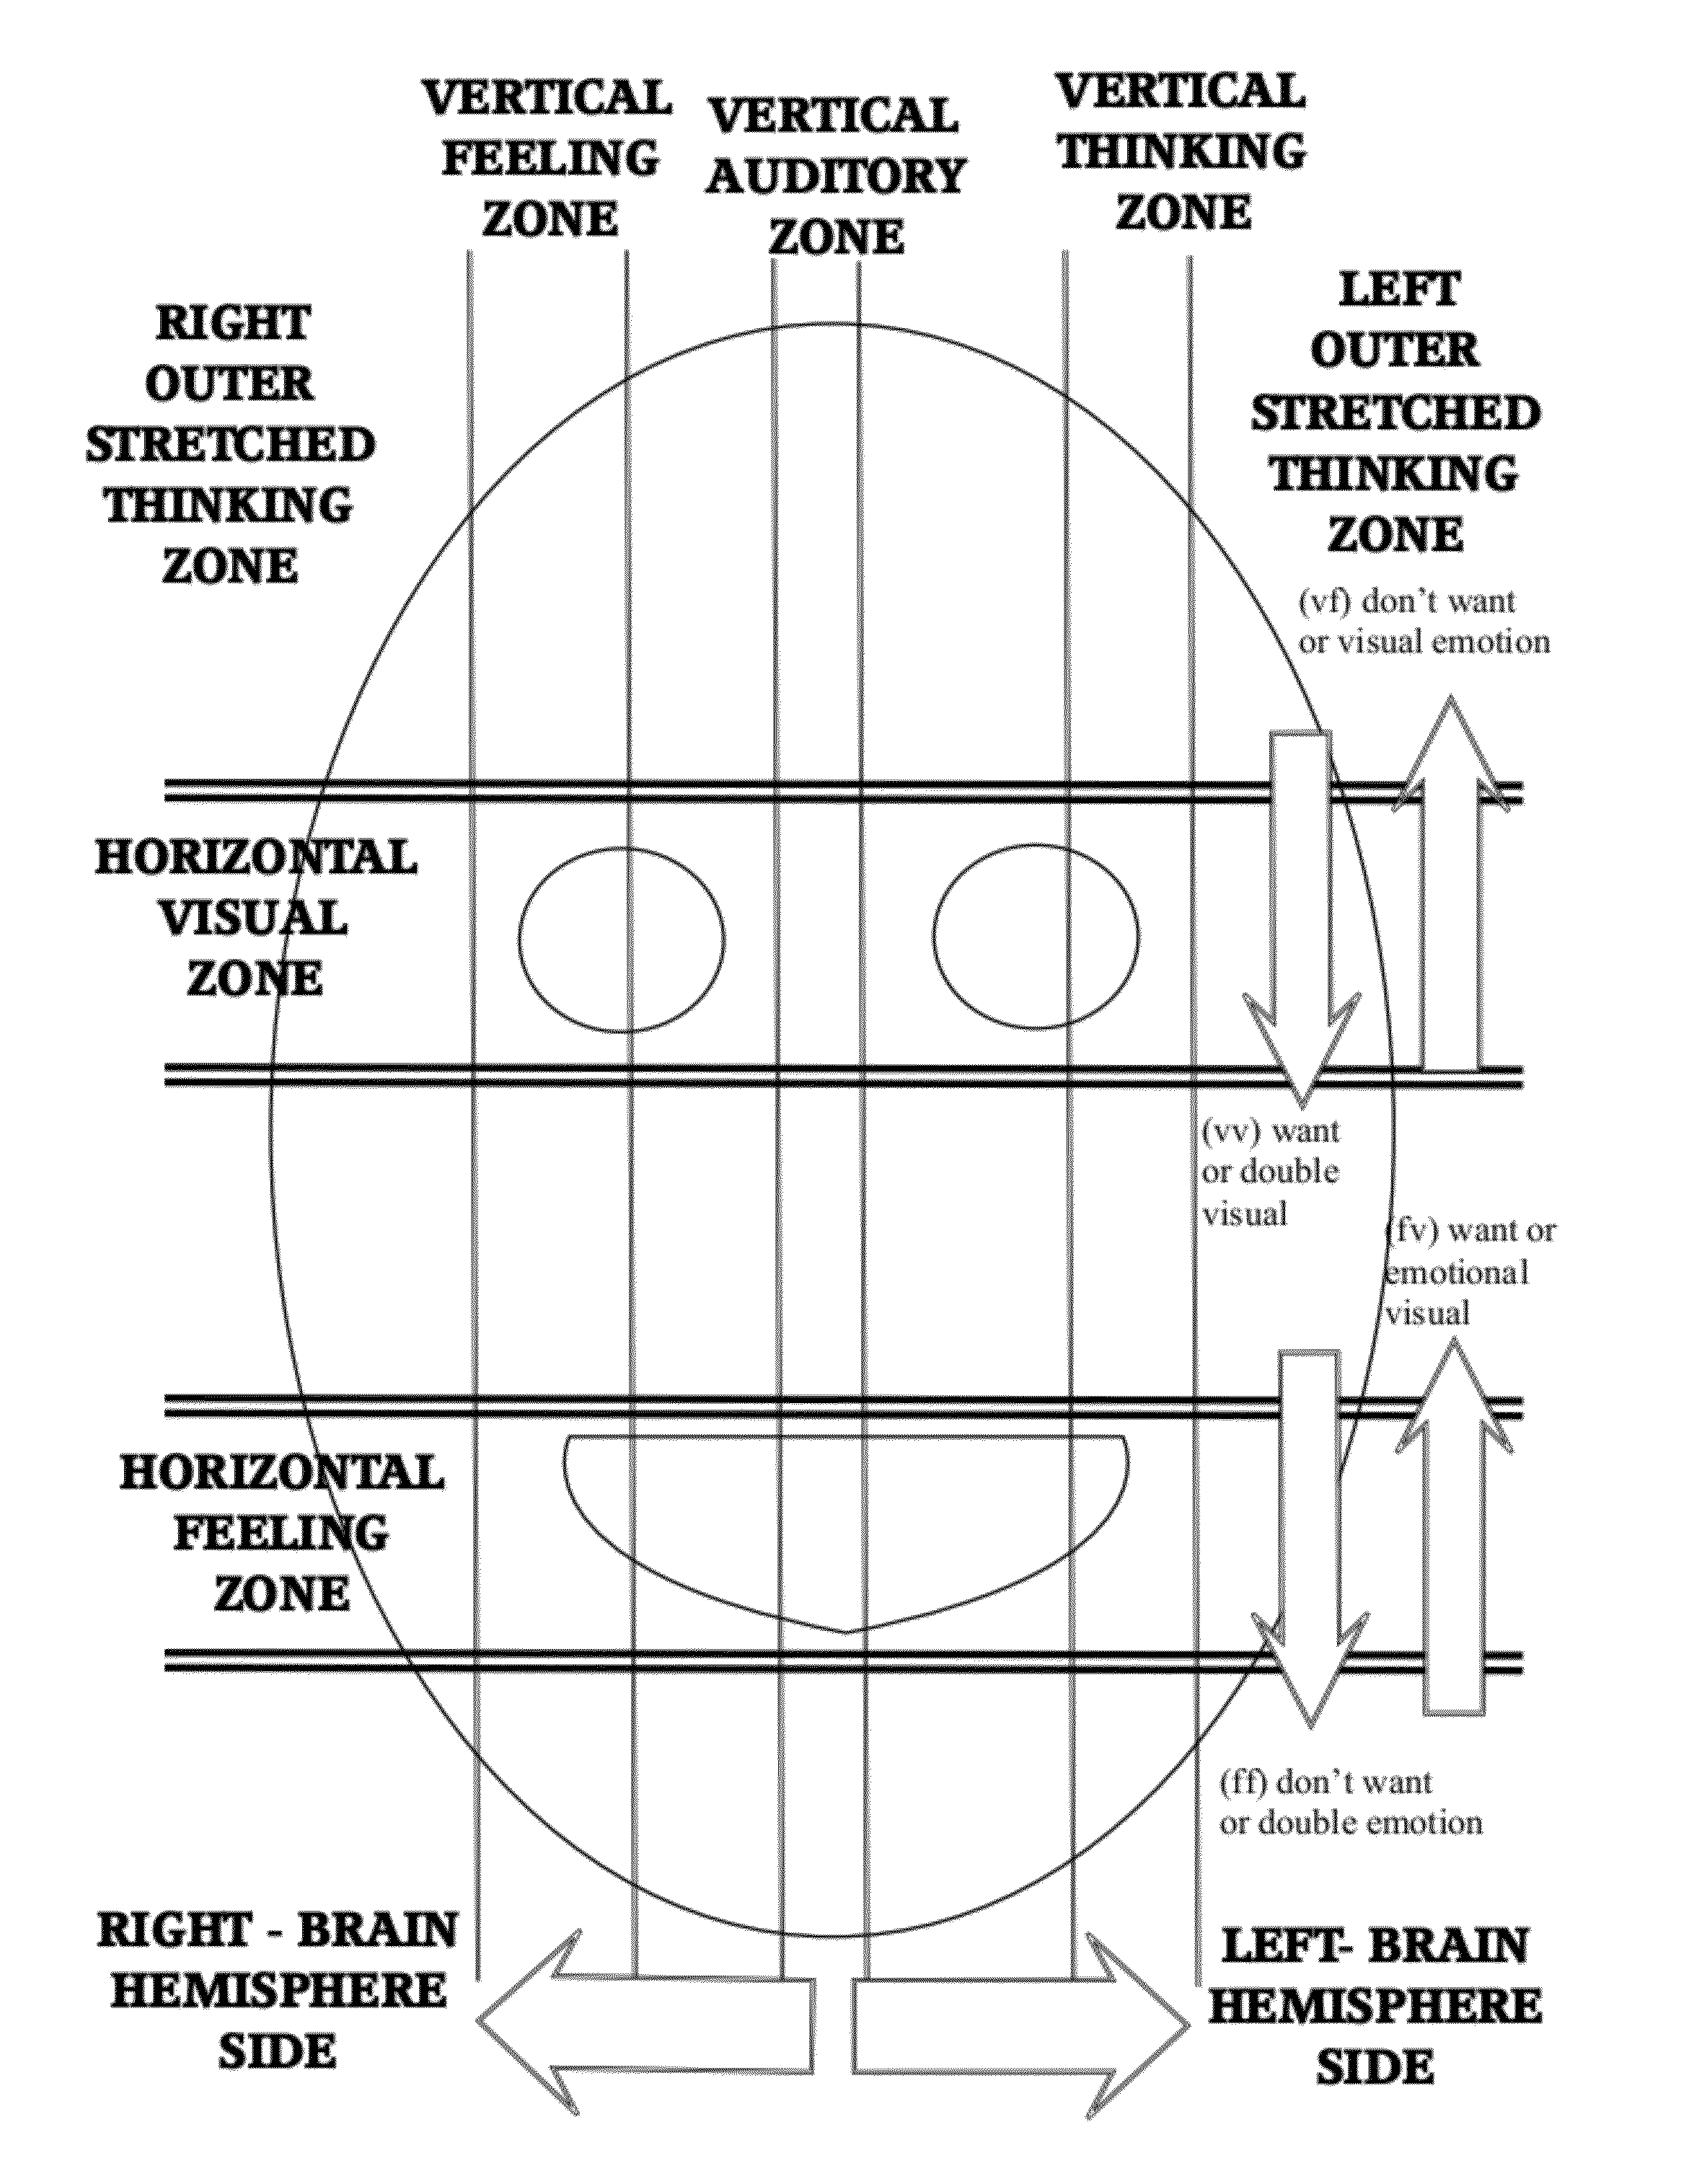 System and Method for Identifying, Analyzing and Altering an Entity's Motivations and Characteristics